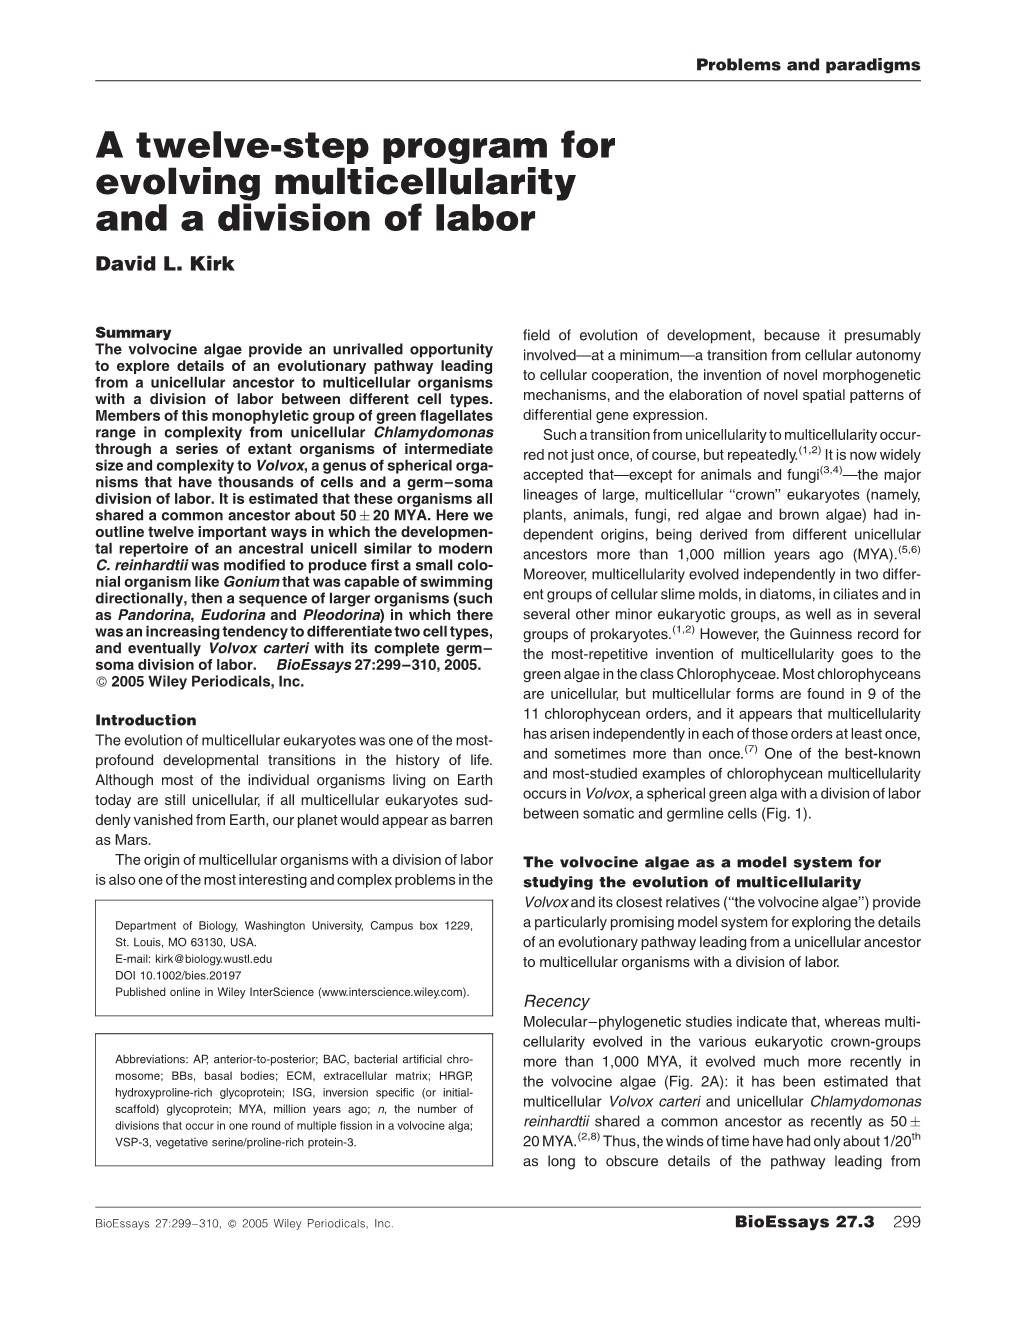 A Twelve-Step Program for Evolving Multicellularity and a Division of Labor David L